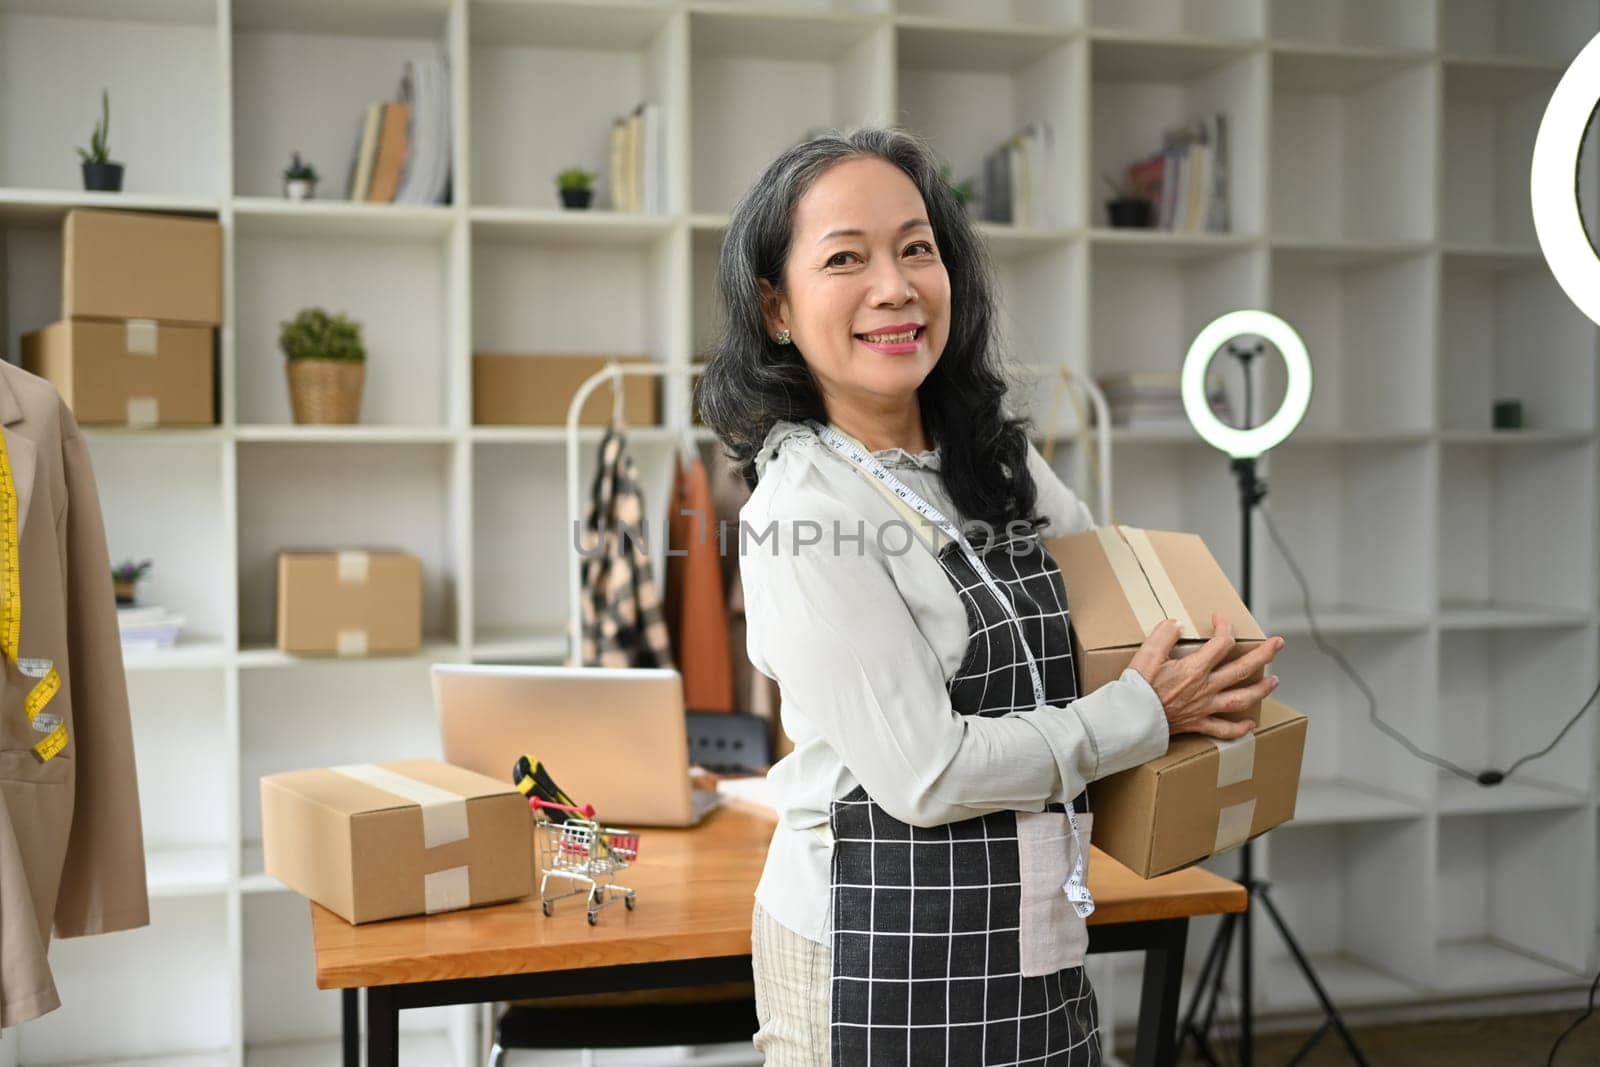 Confident senior woman small business owner holding parcel boxes of product and smiling to camera.